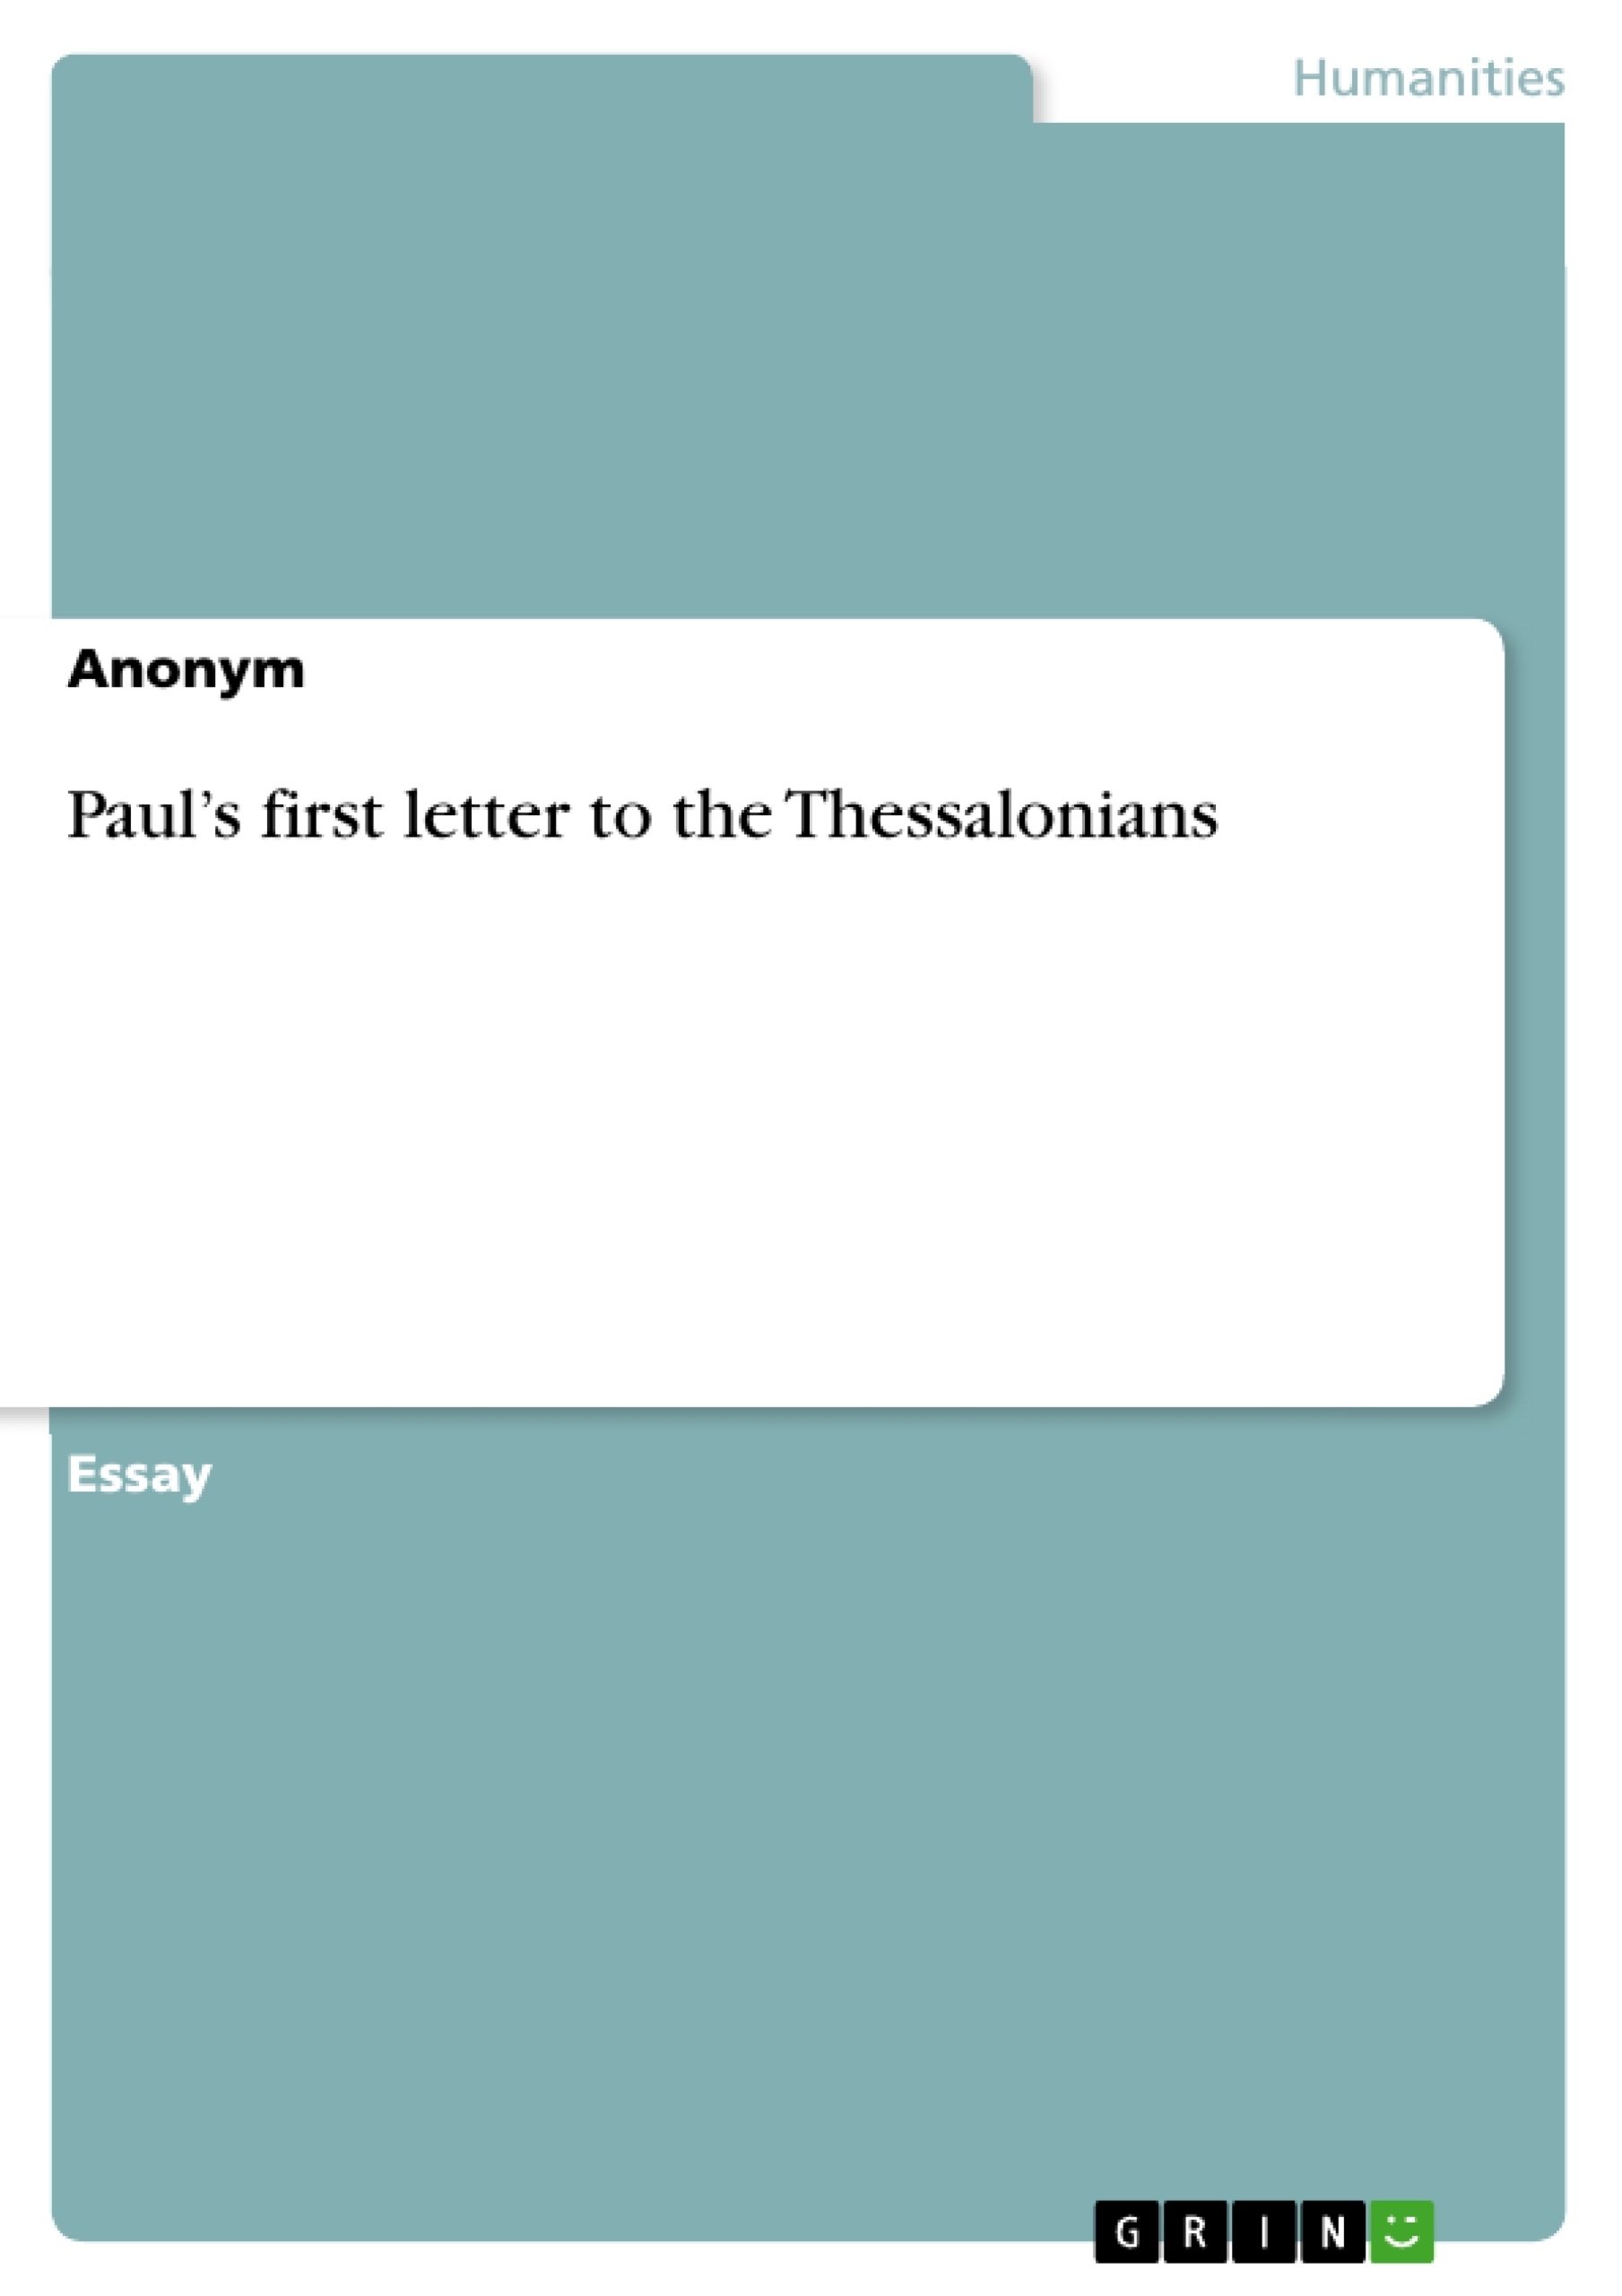 Title: Paul’s first letter to the Thessalonians